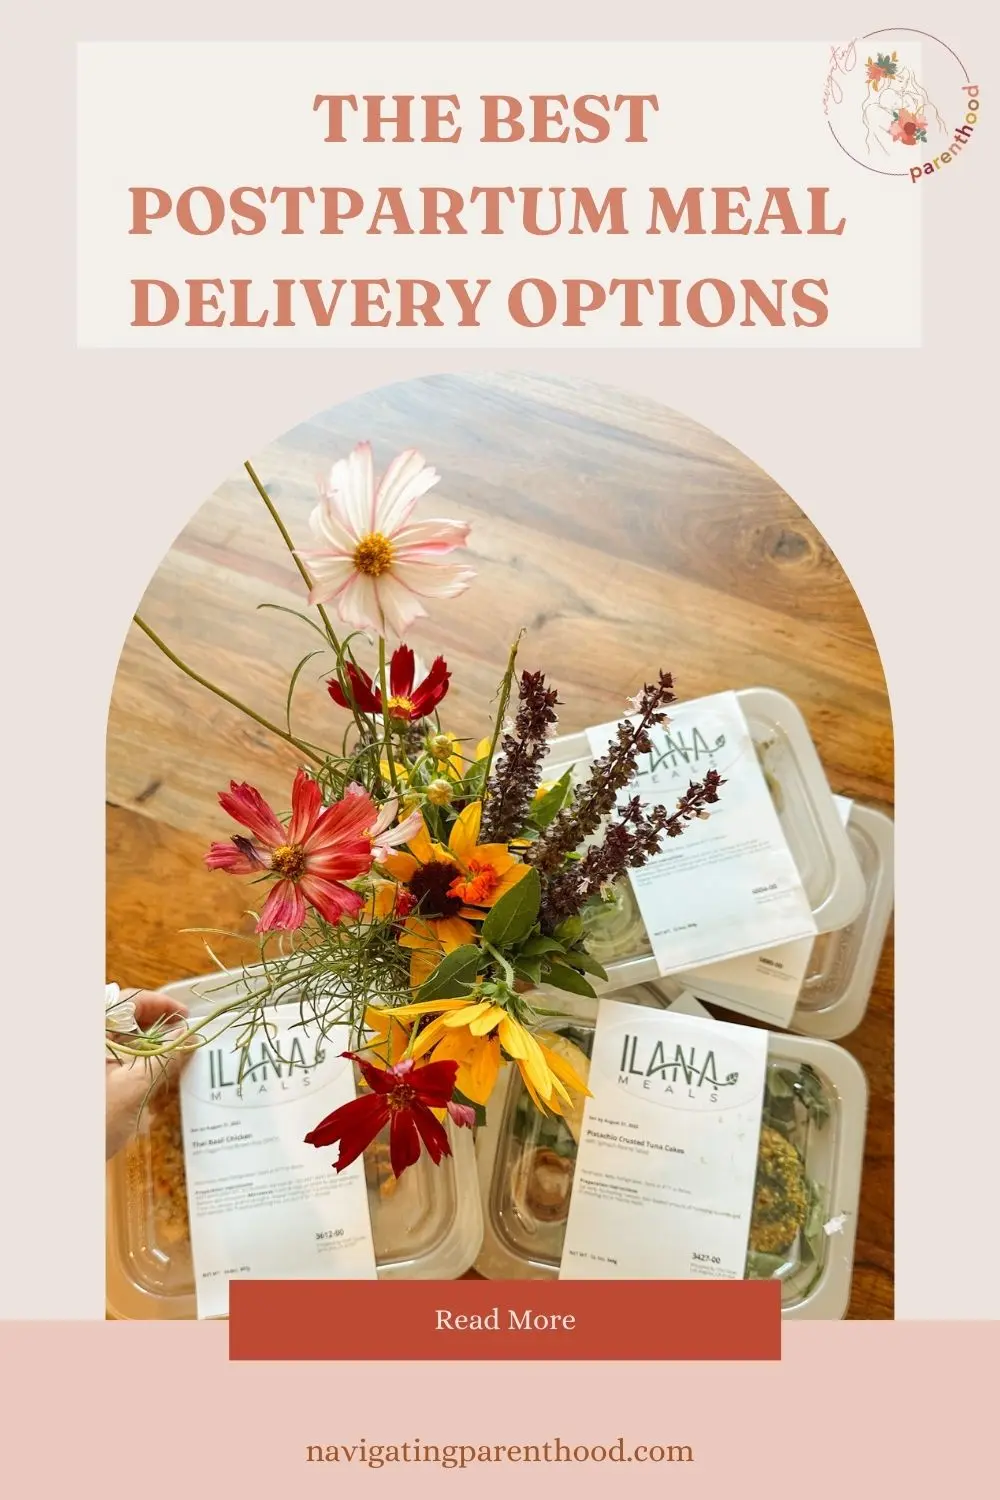 The Best Postpartum Meal Delivery Options for New Parents